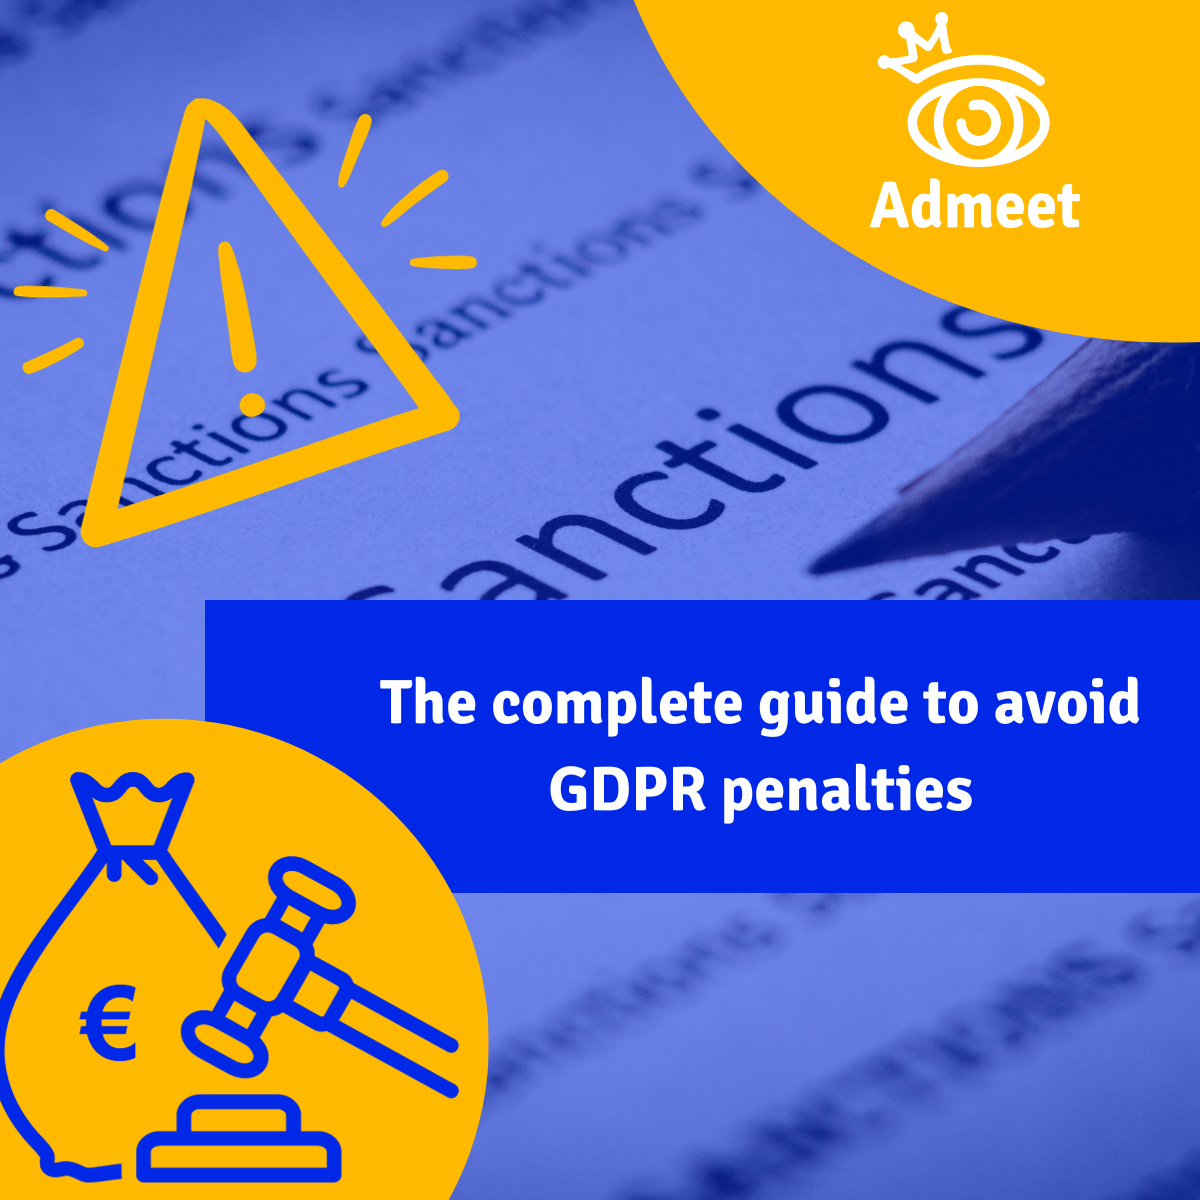 Admeet's complete guide to avoiding GDPR fines and having a compliant website